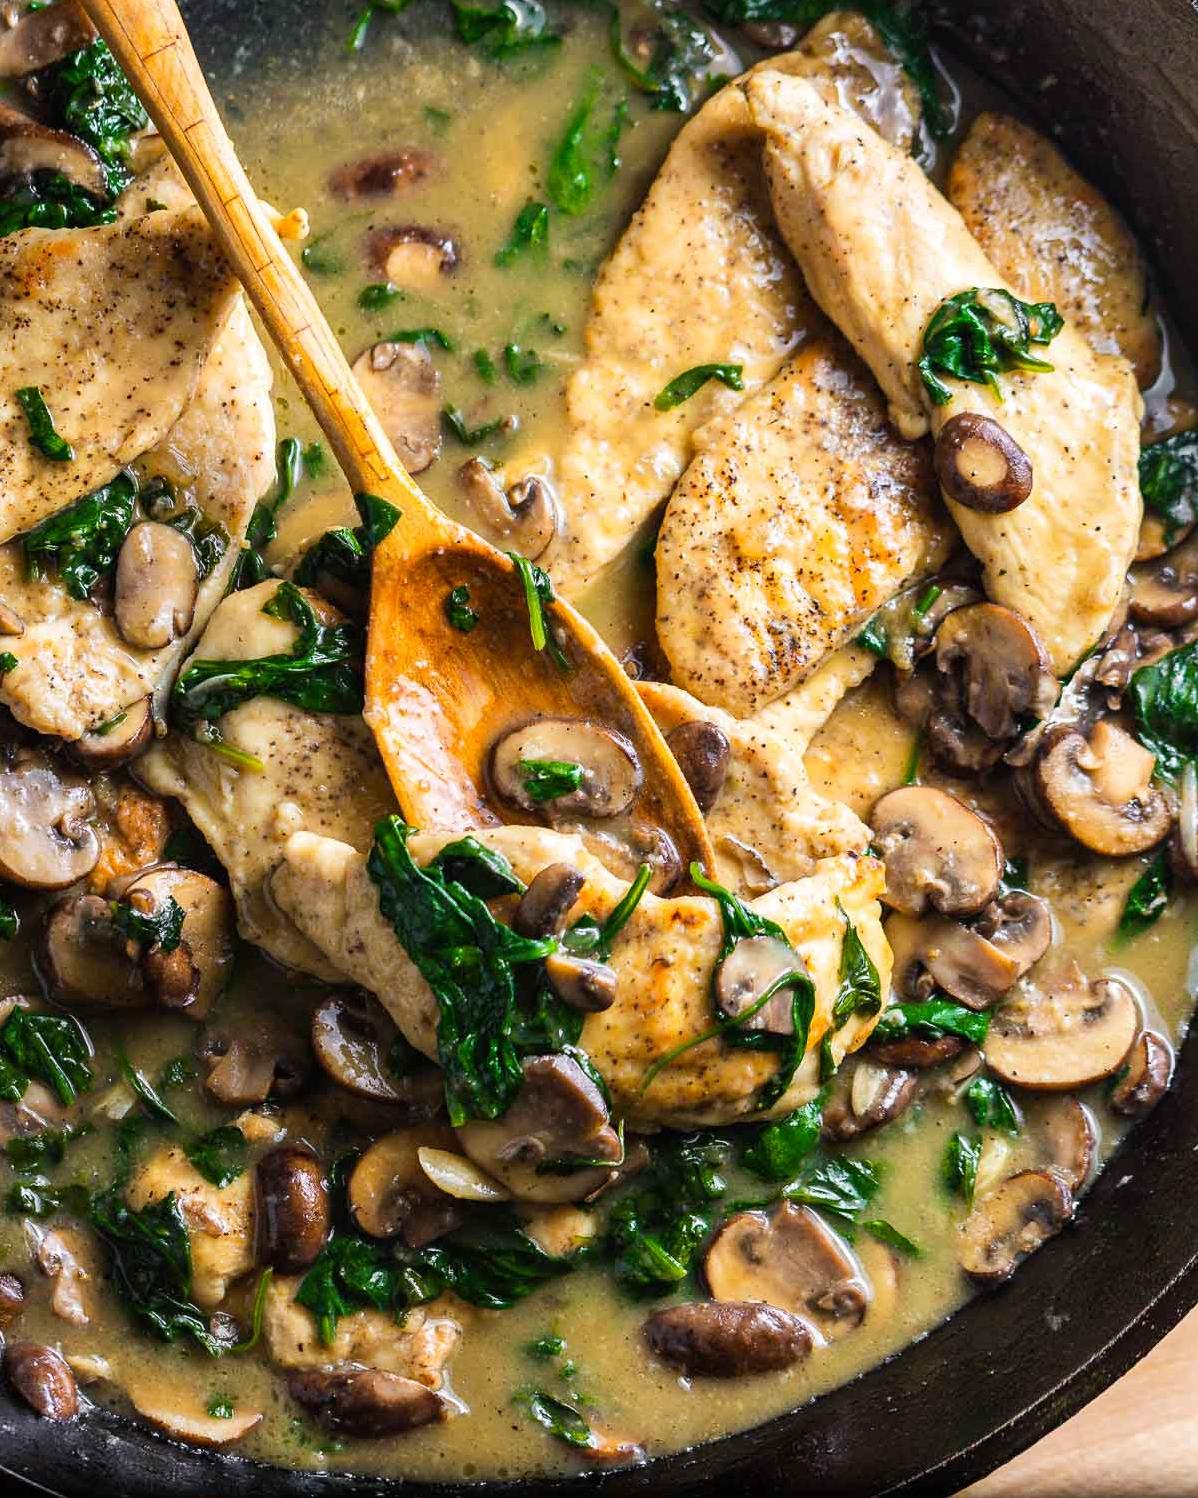  A match made in heaven: red wine, chicken, and spinach.